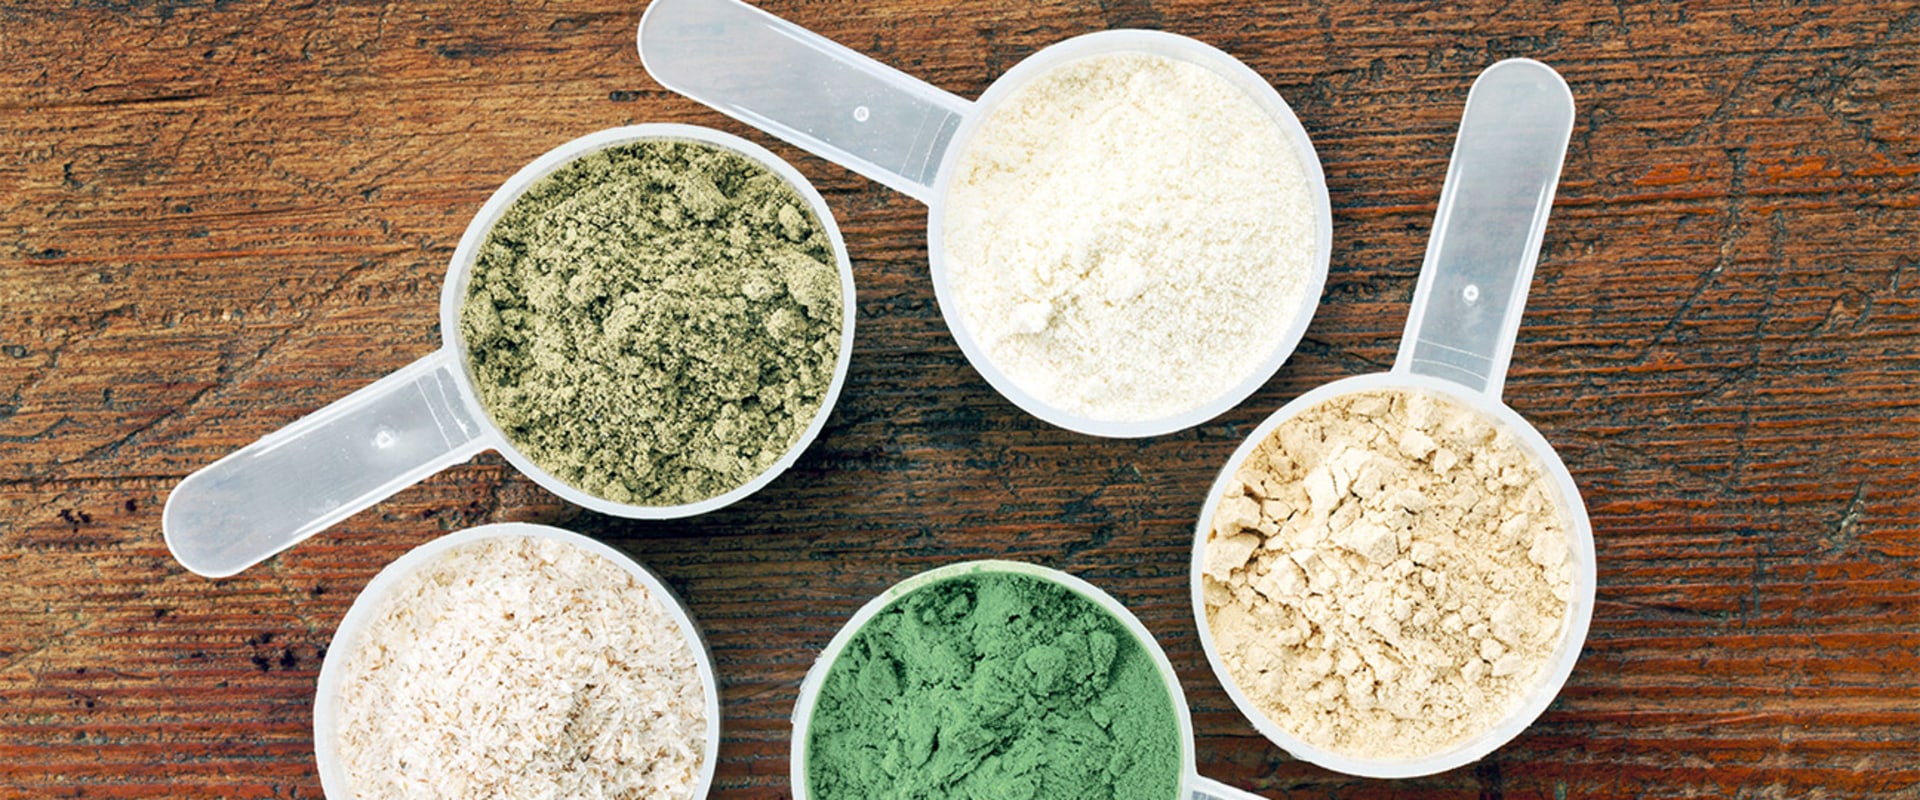 Are there different types of protein powder?